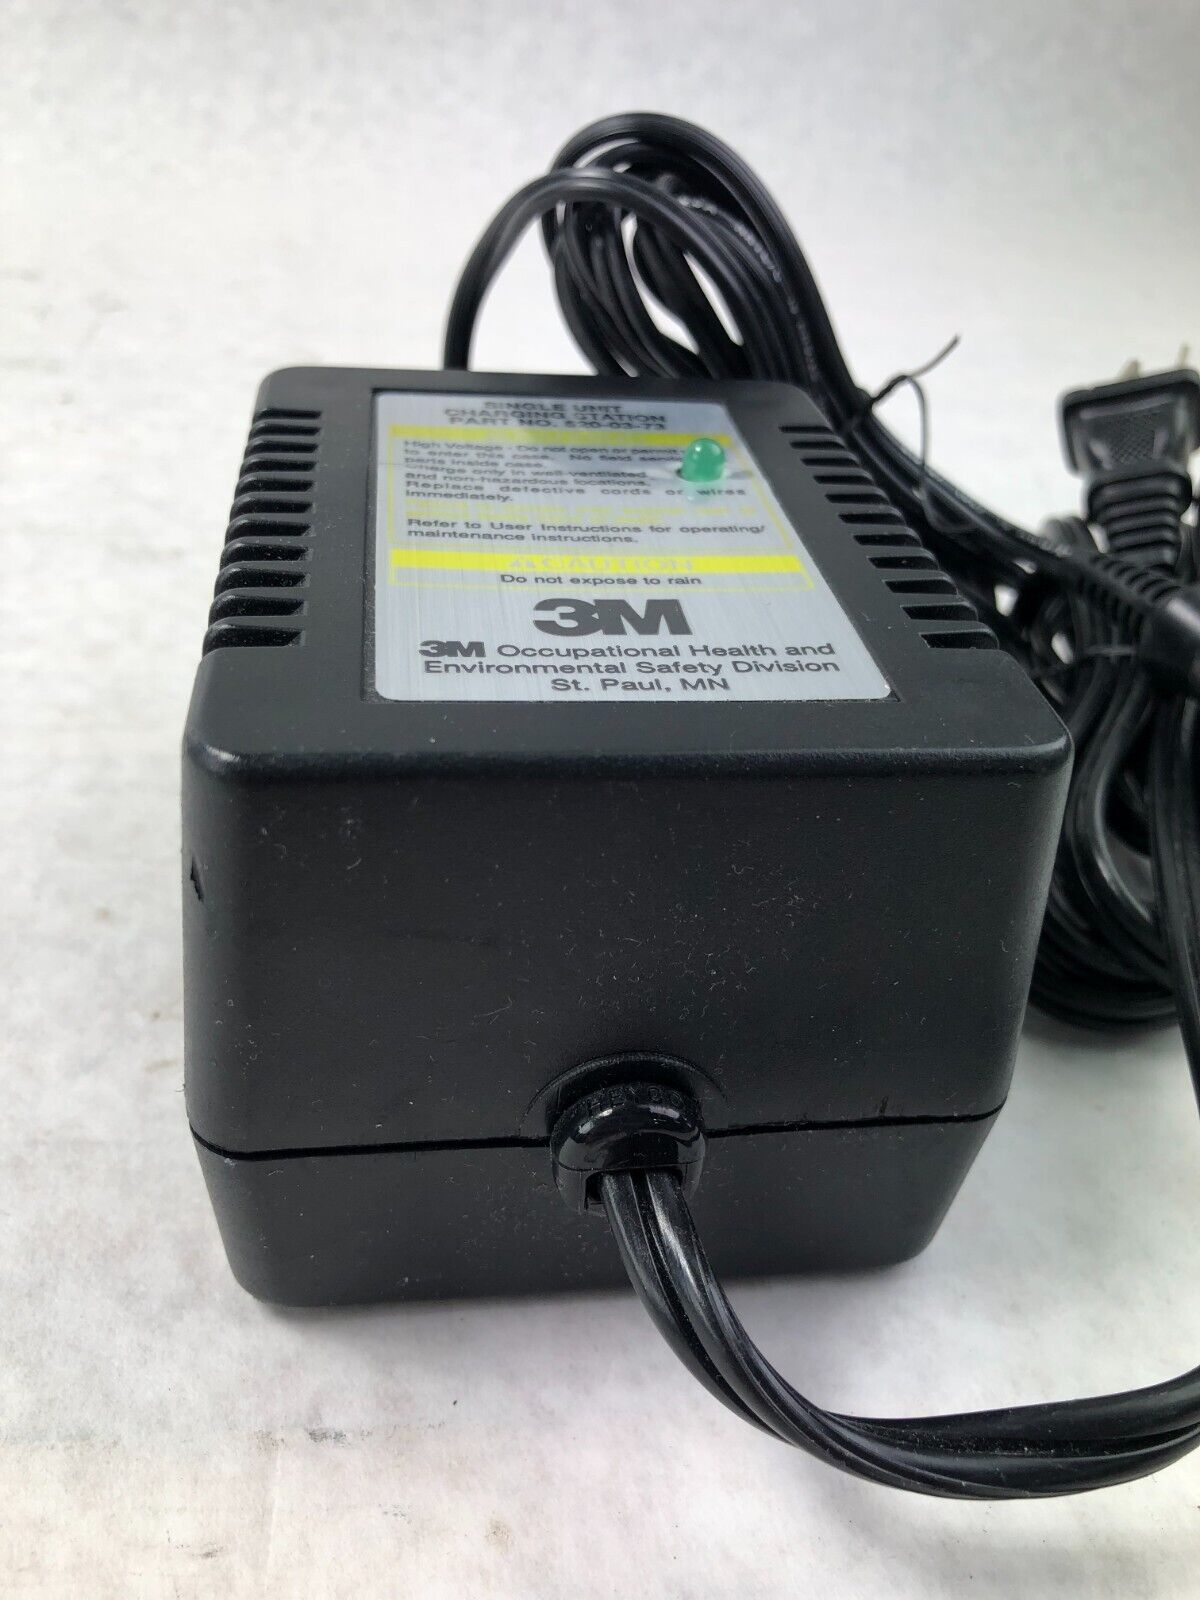 3M 520-03-73 Single Unit Charging Station AIR-MATE YL7160